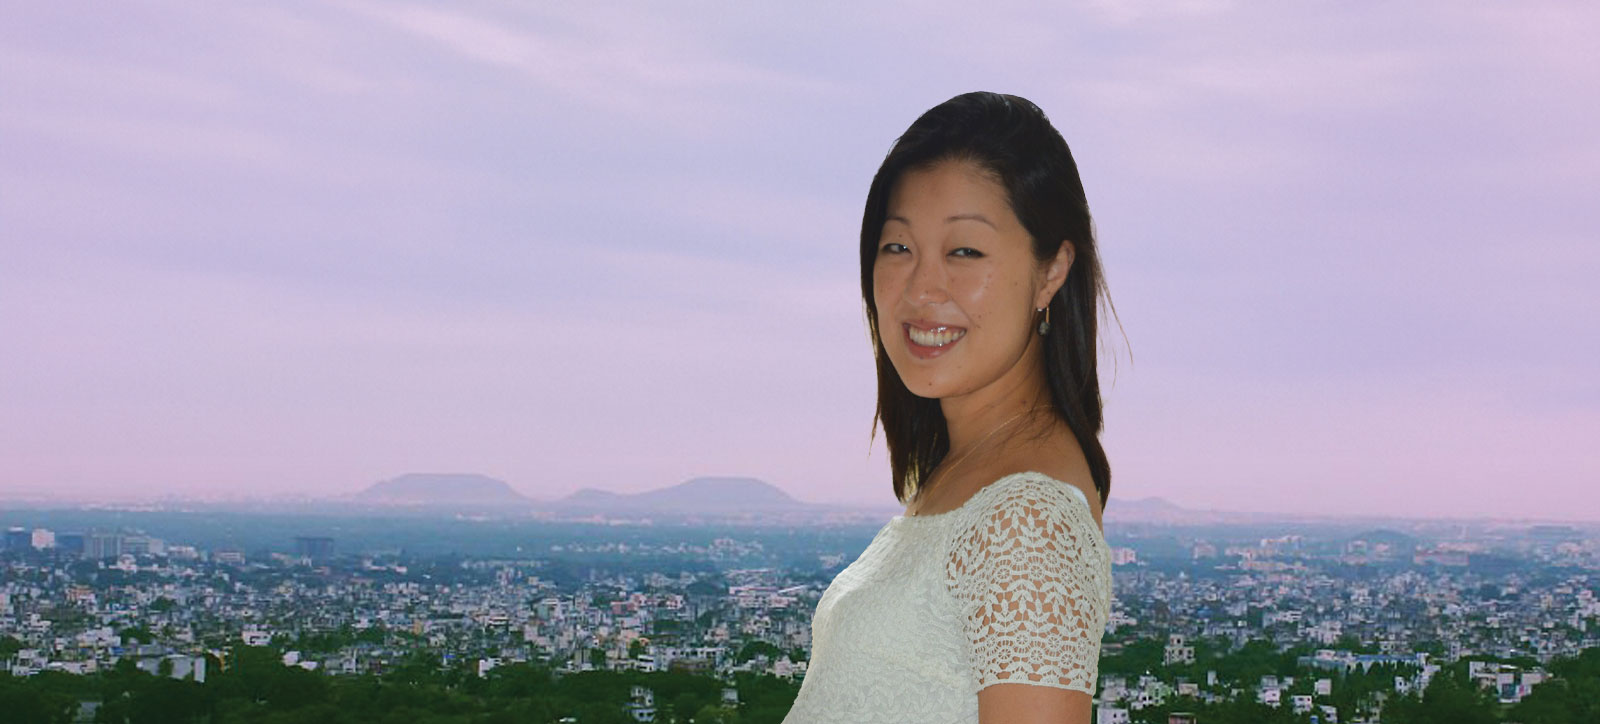 Claudia Akemi Umemura found the flexibility of an online MBA helped her resume her career.